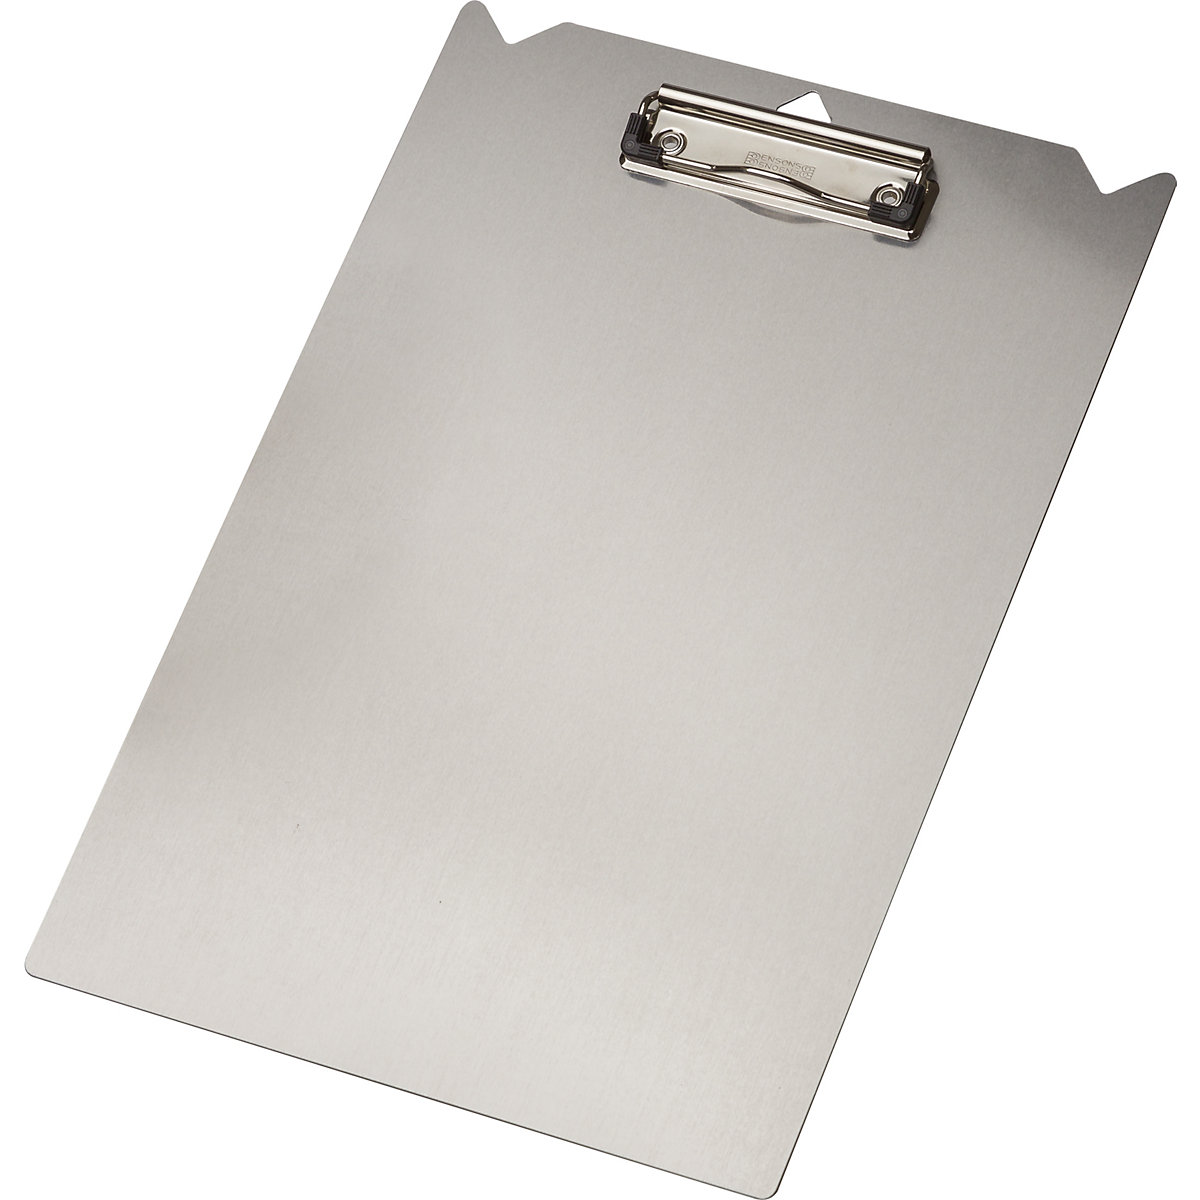 Aluminium clipboard – Tarifold: with suspension hole, for A4